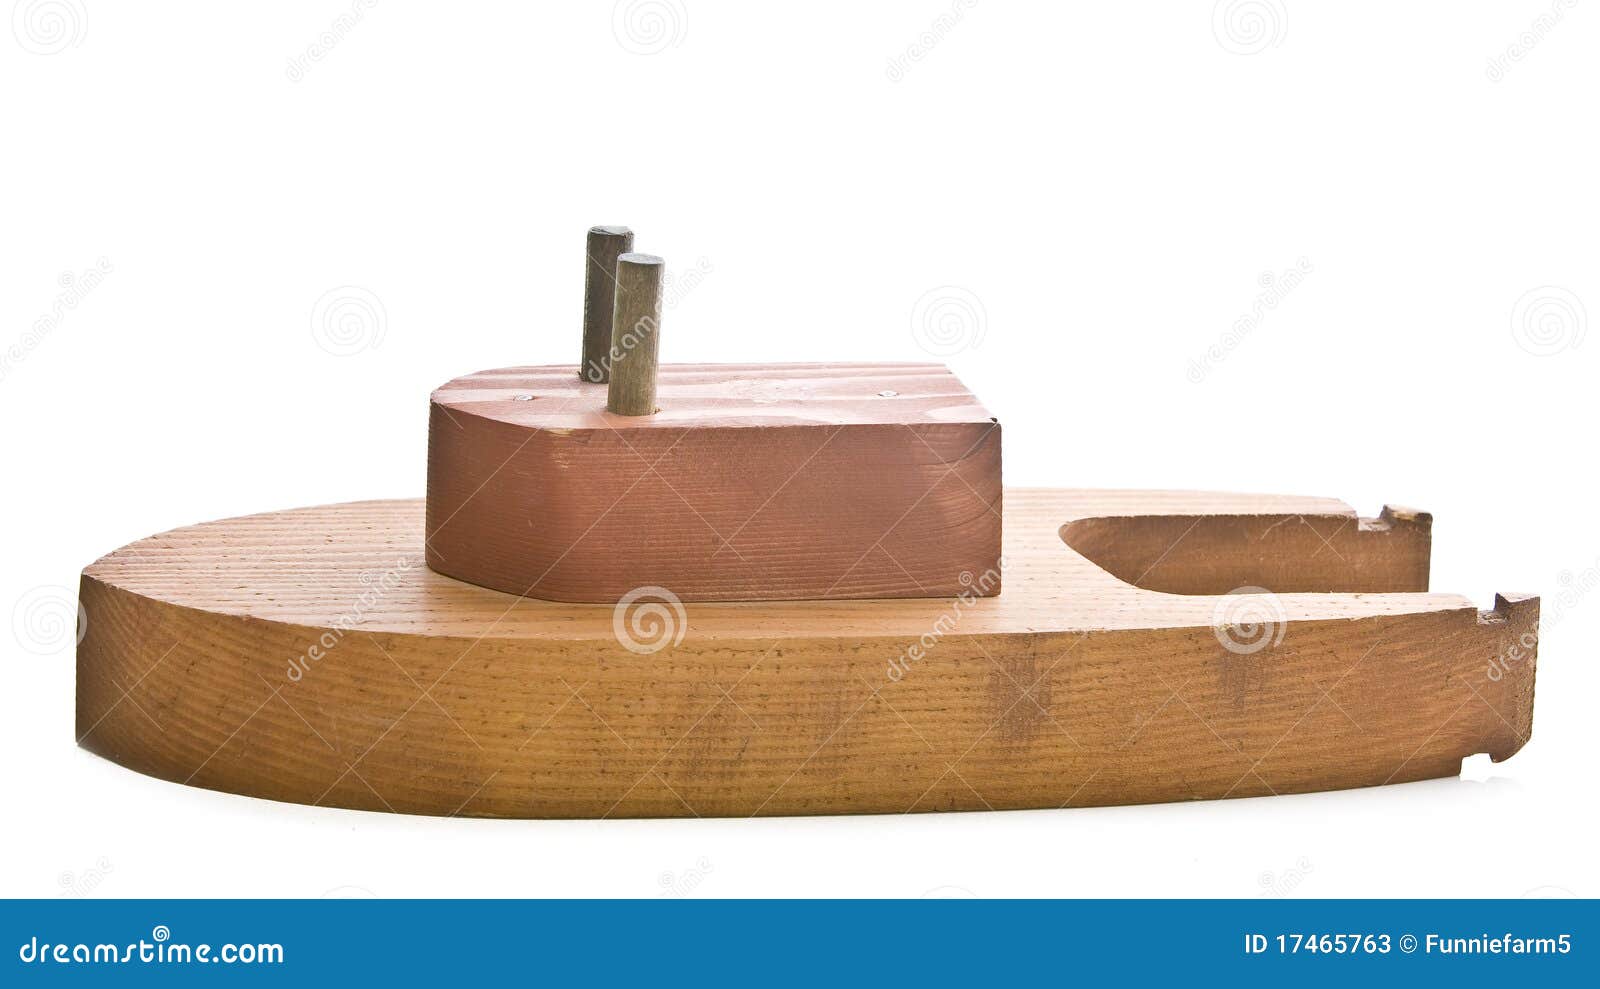 Wooden Toy Boat Plans